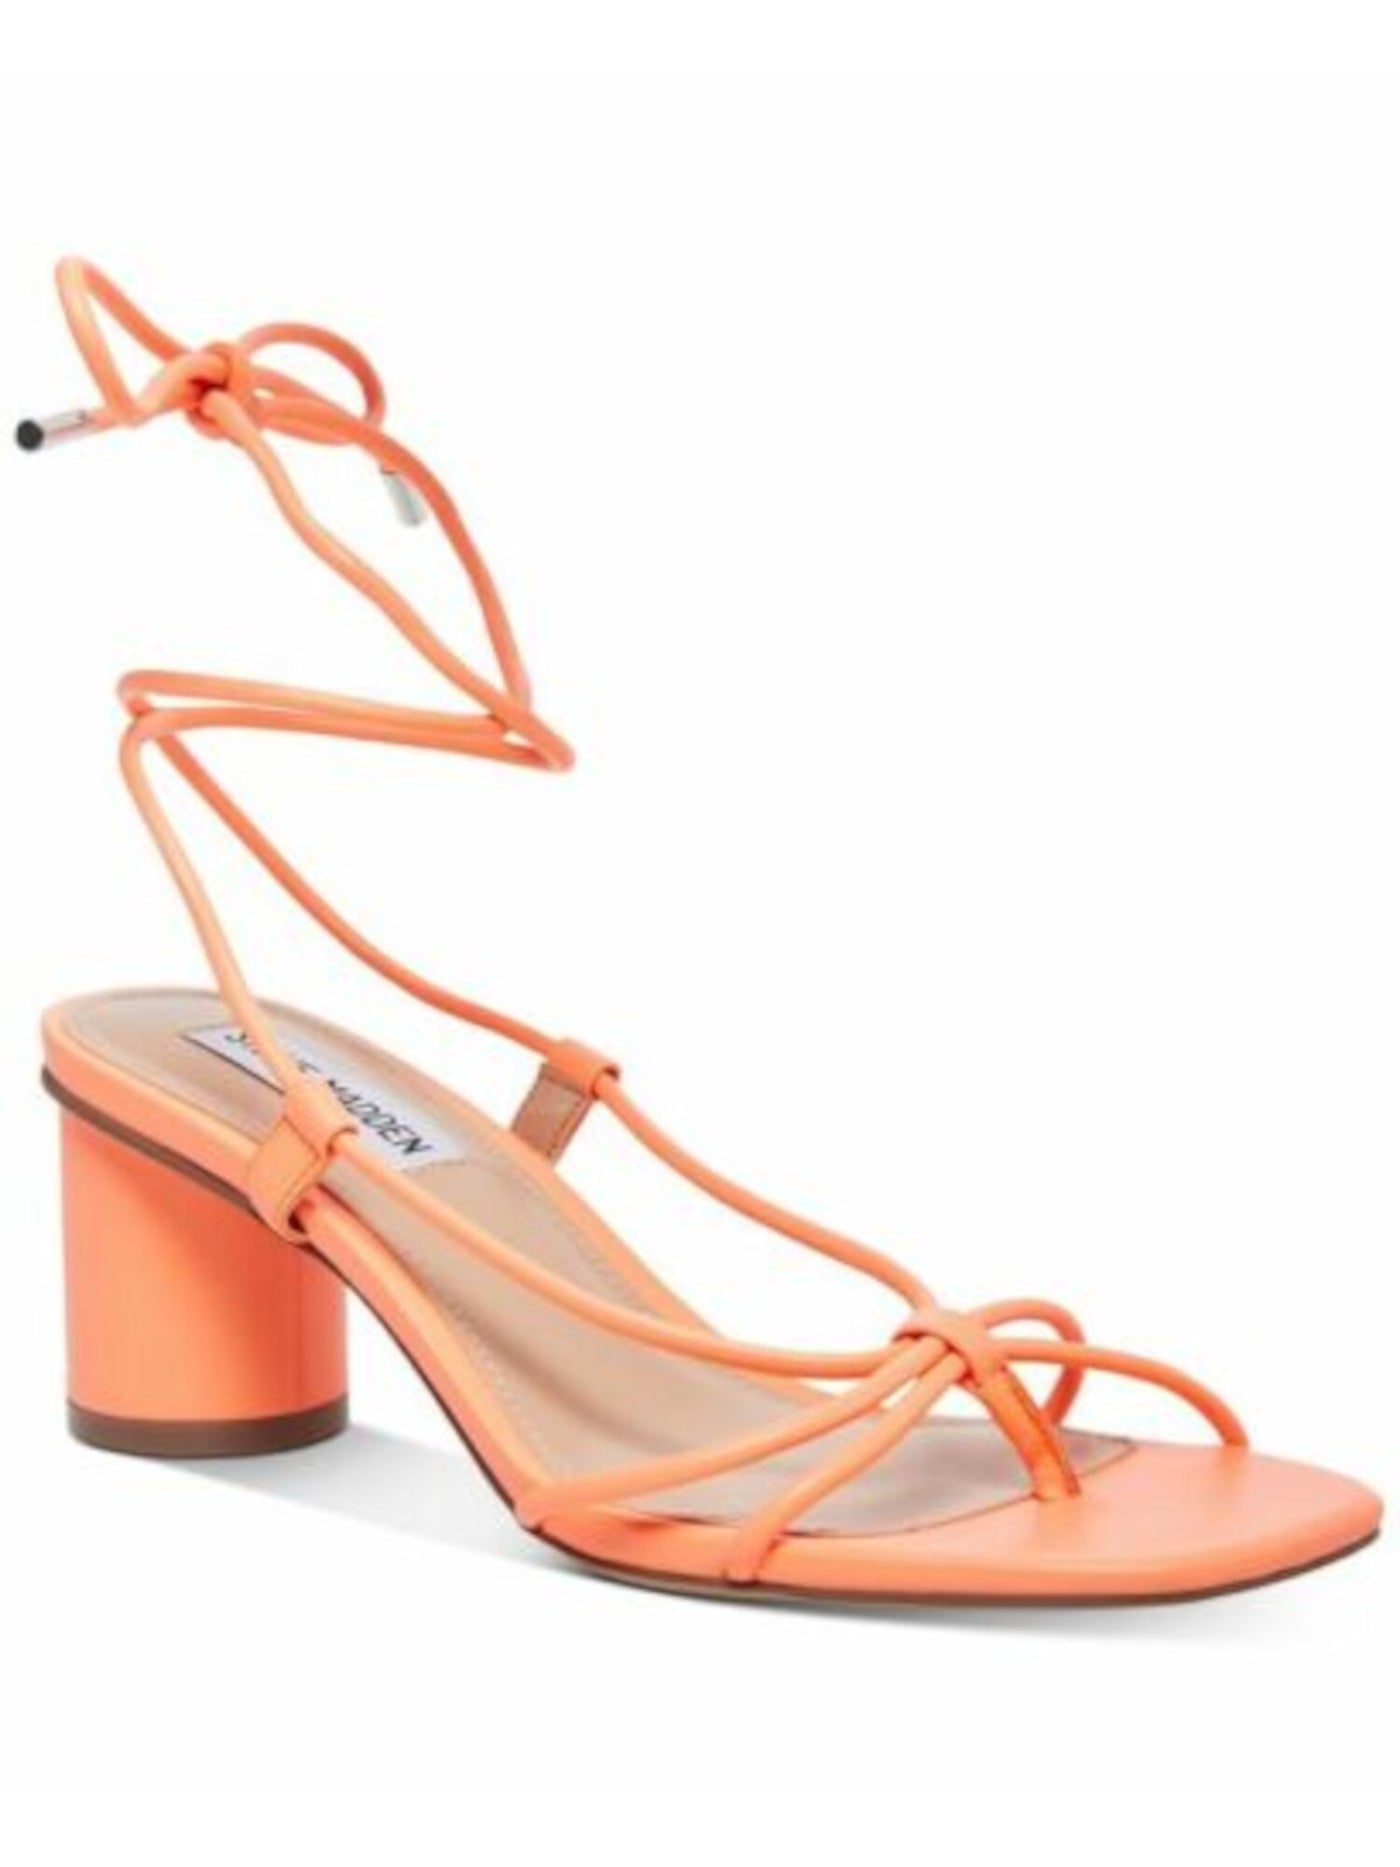 STEVE MADDEN Womens Orange Ankle Tie Dress Sandal Strappy Ivanna Square Toe Block Heel Lace-Up Thong Sandals Shoes 9.5 M